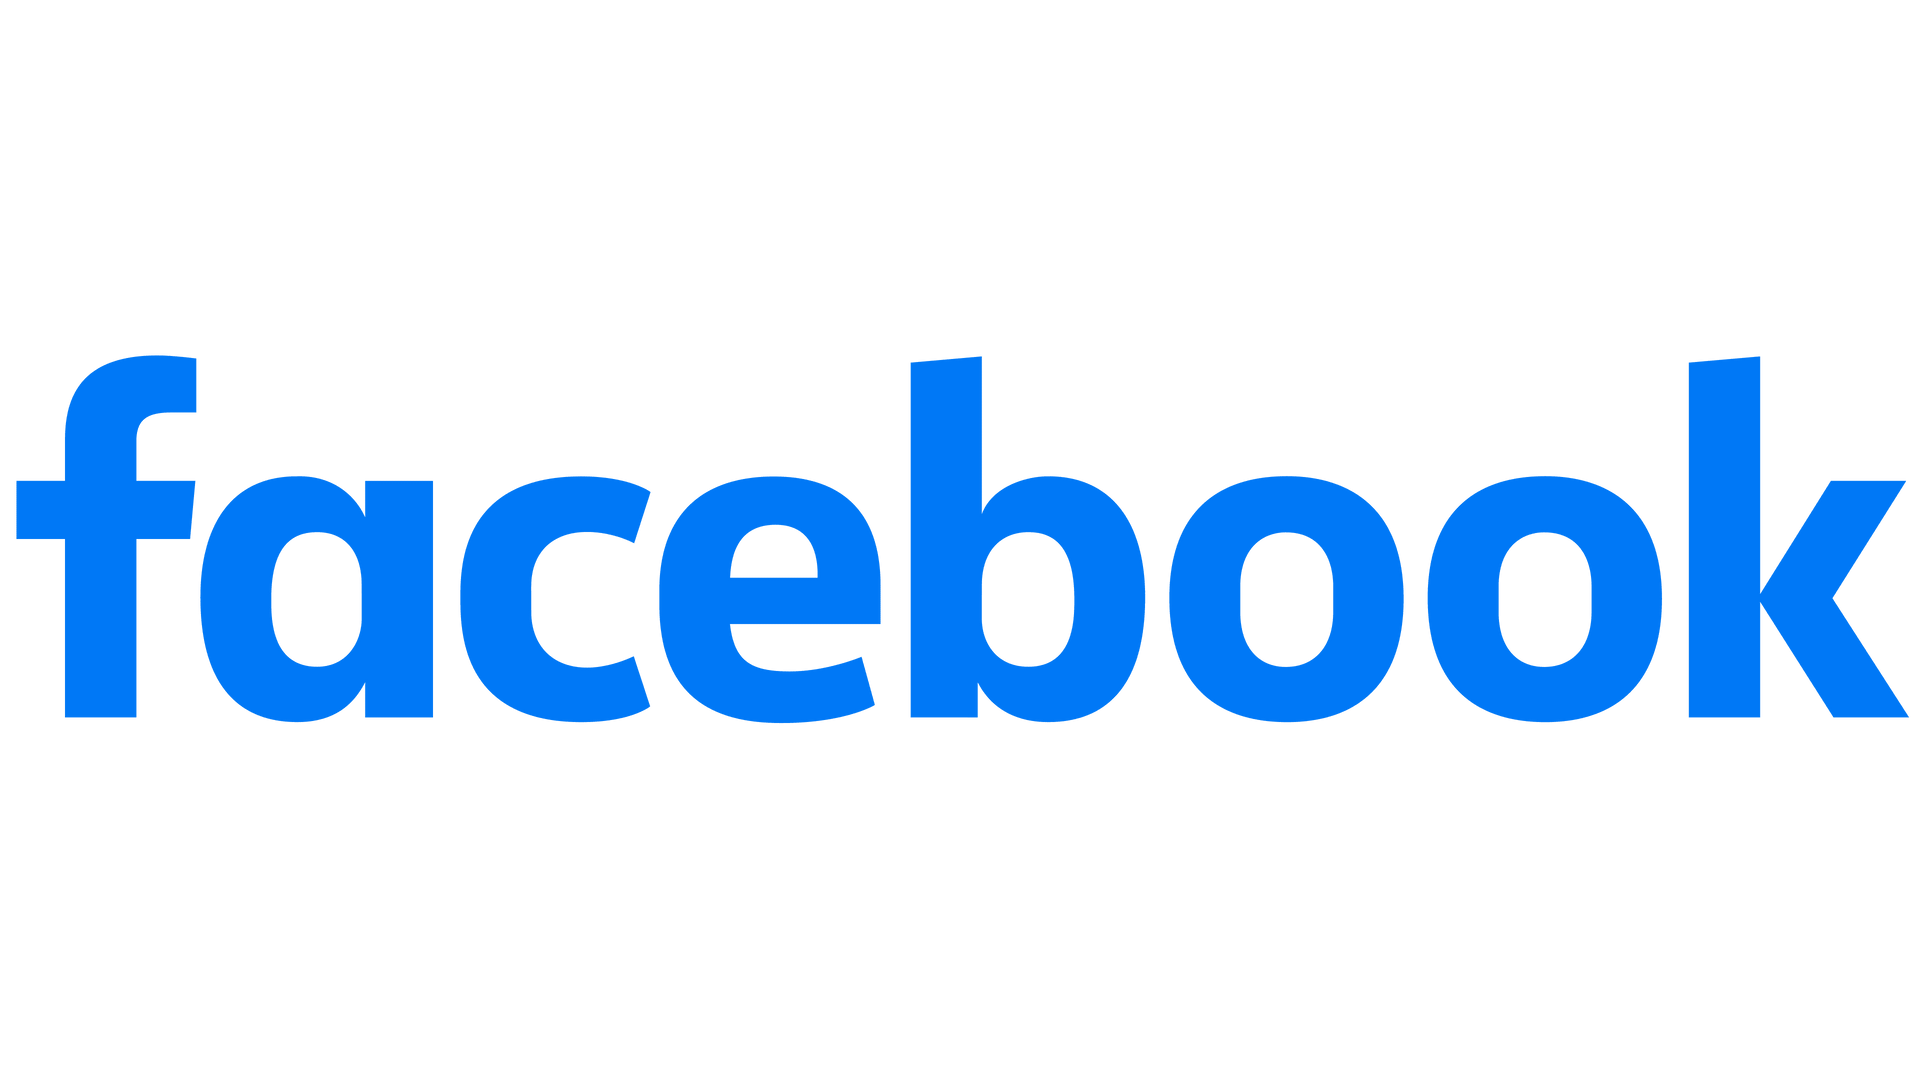 the facebook logo is blue and white on a white background .